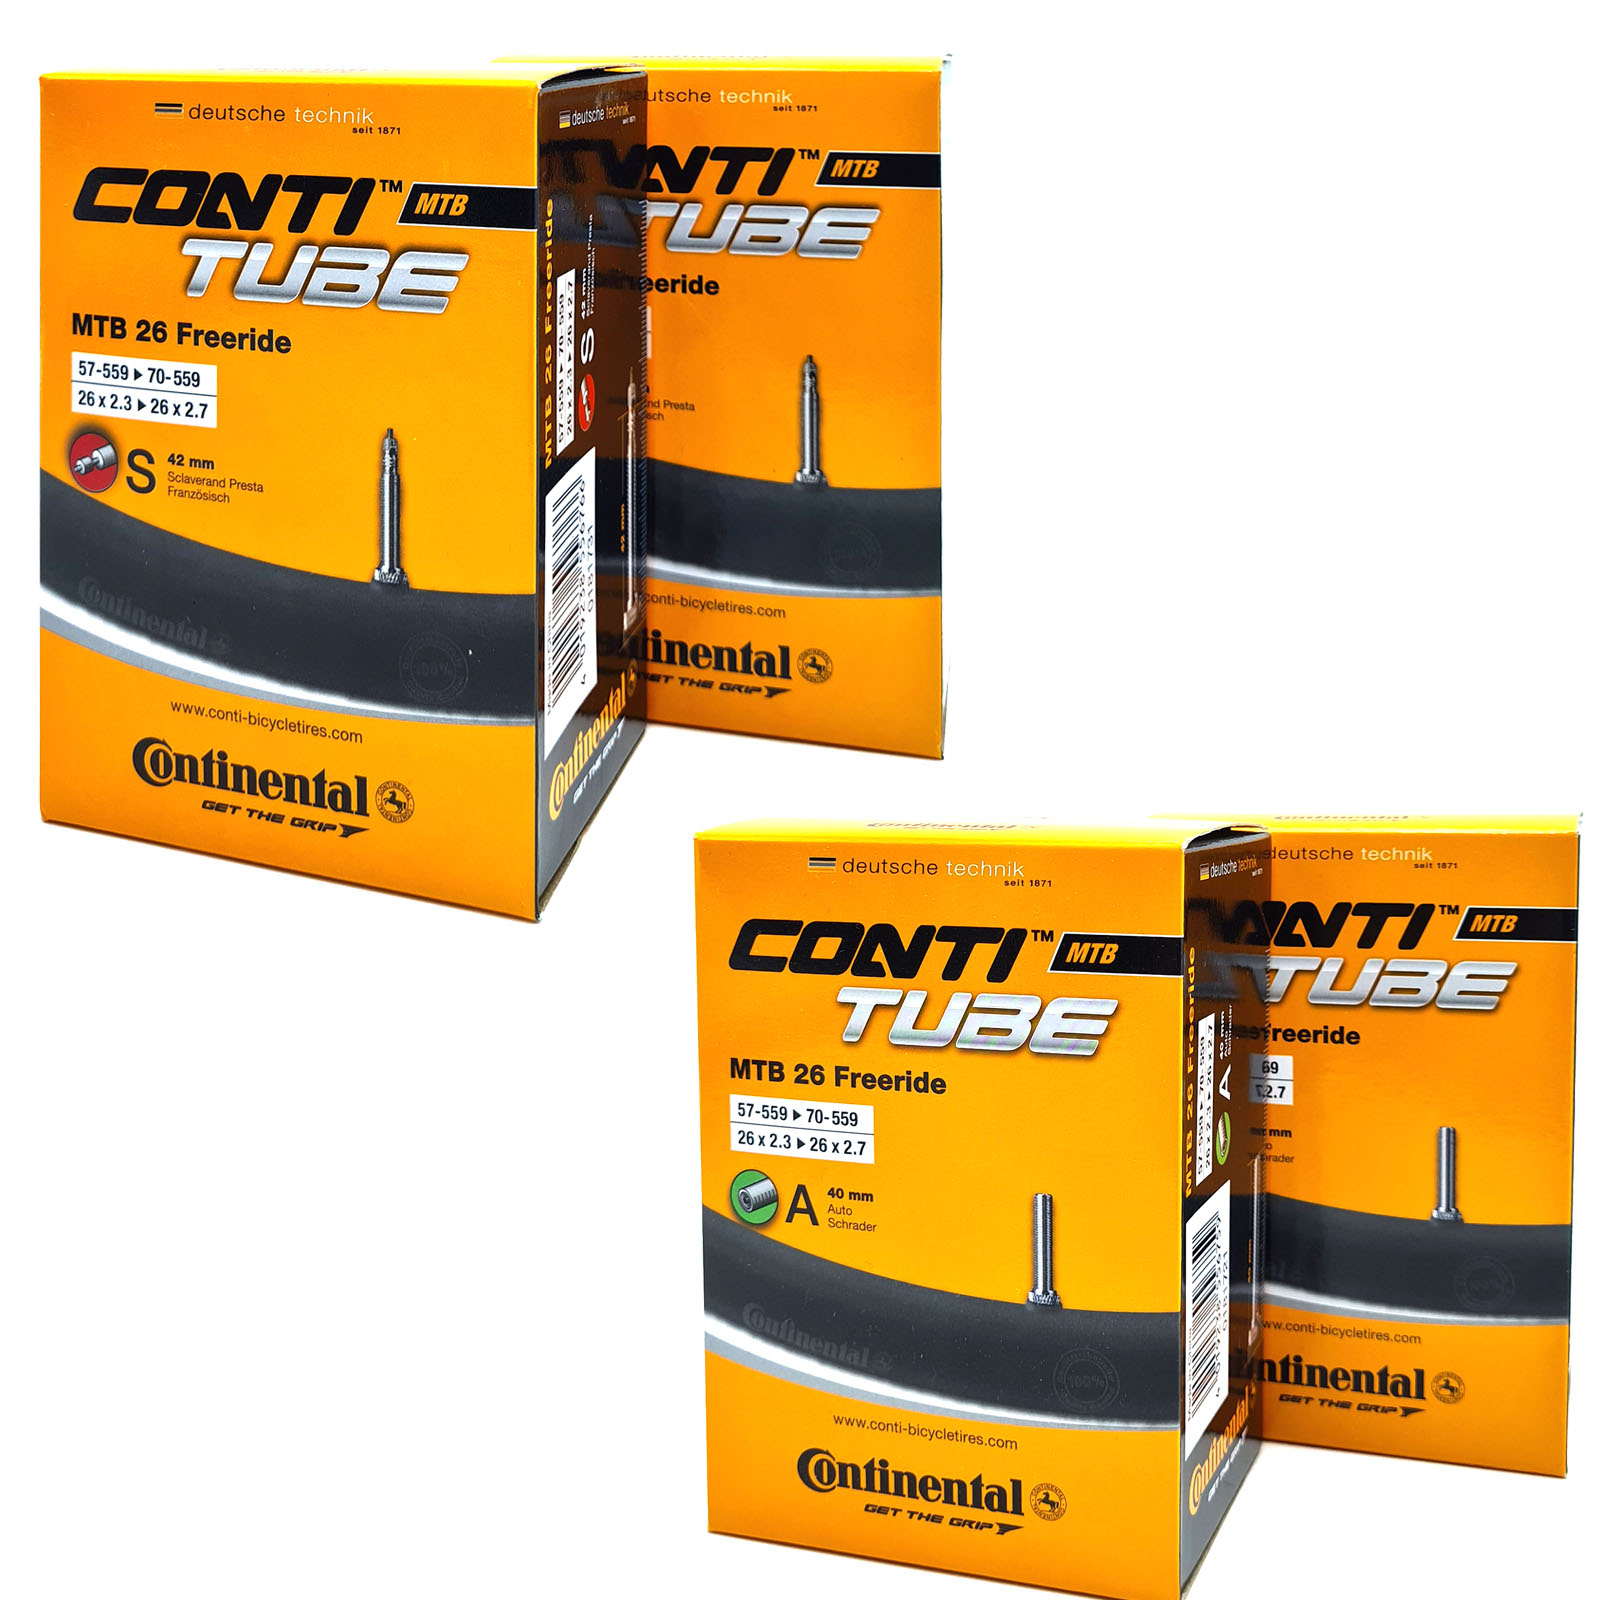 2x Continental Schlauch MTB 26 Freeride Autoventil